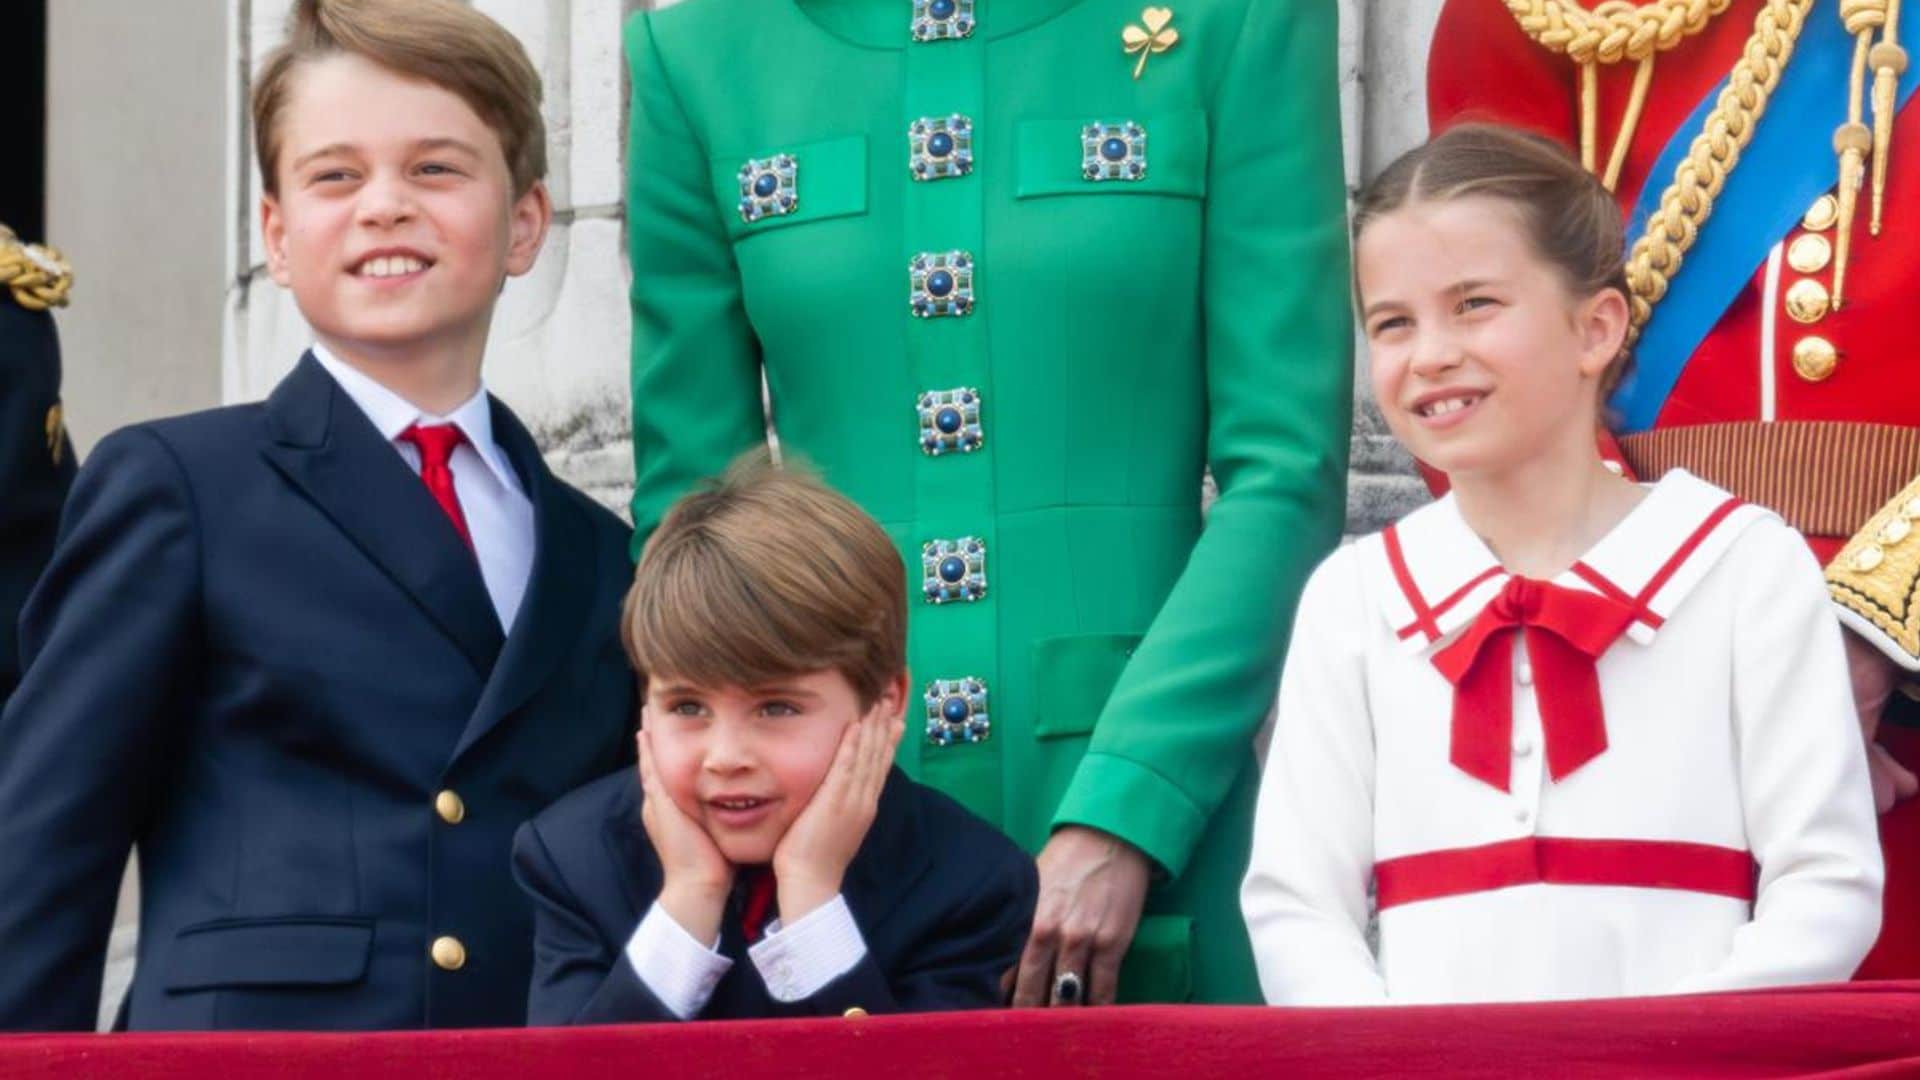 The Princess of Wales’ kids have been ‘very hands-on’ following her return home: report